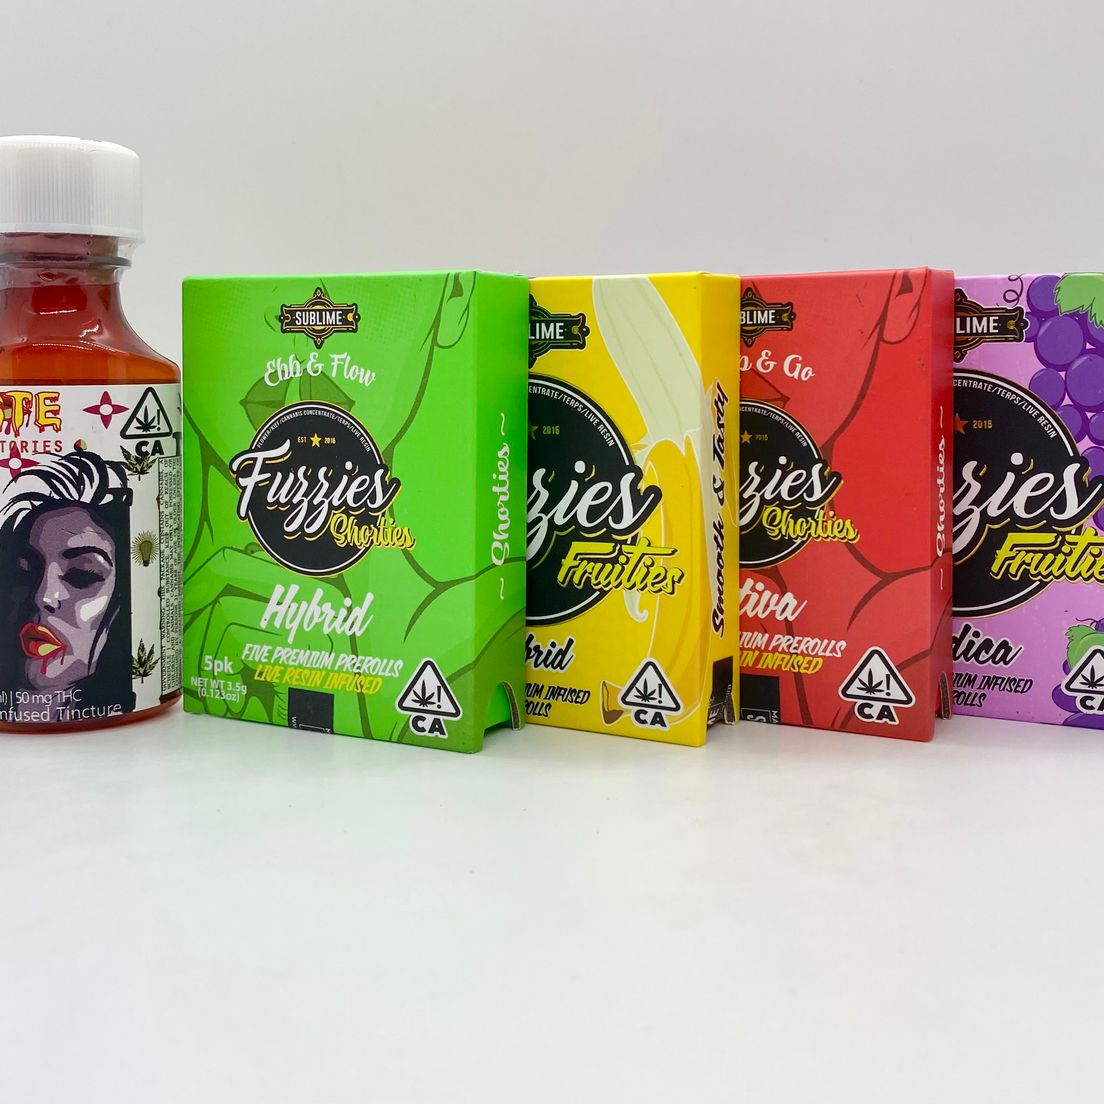 *Deal! $139 Buy Any (4) 3.5g Shorties Fuzzies 5-Packs by Sublime + 50mg Edible